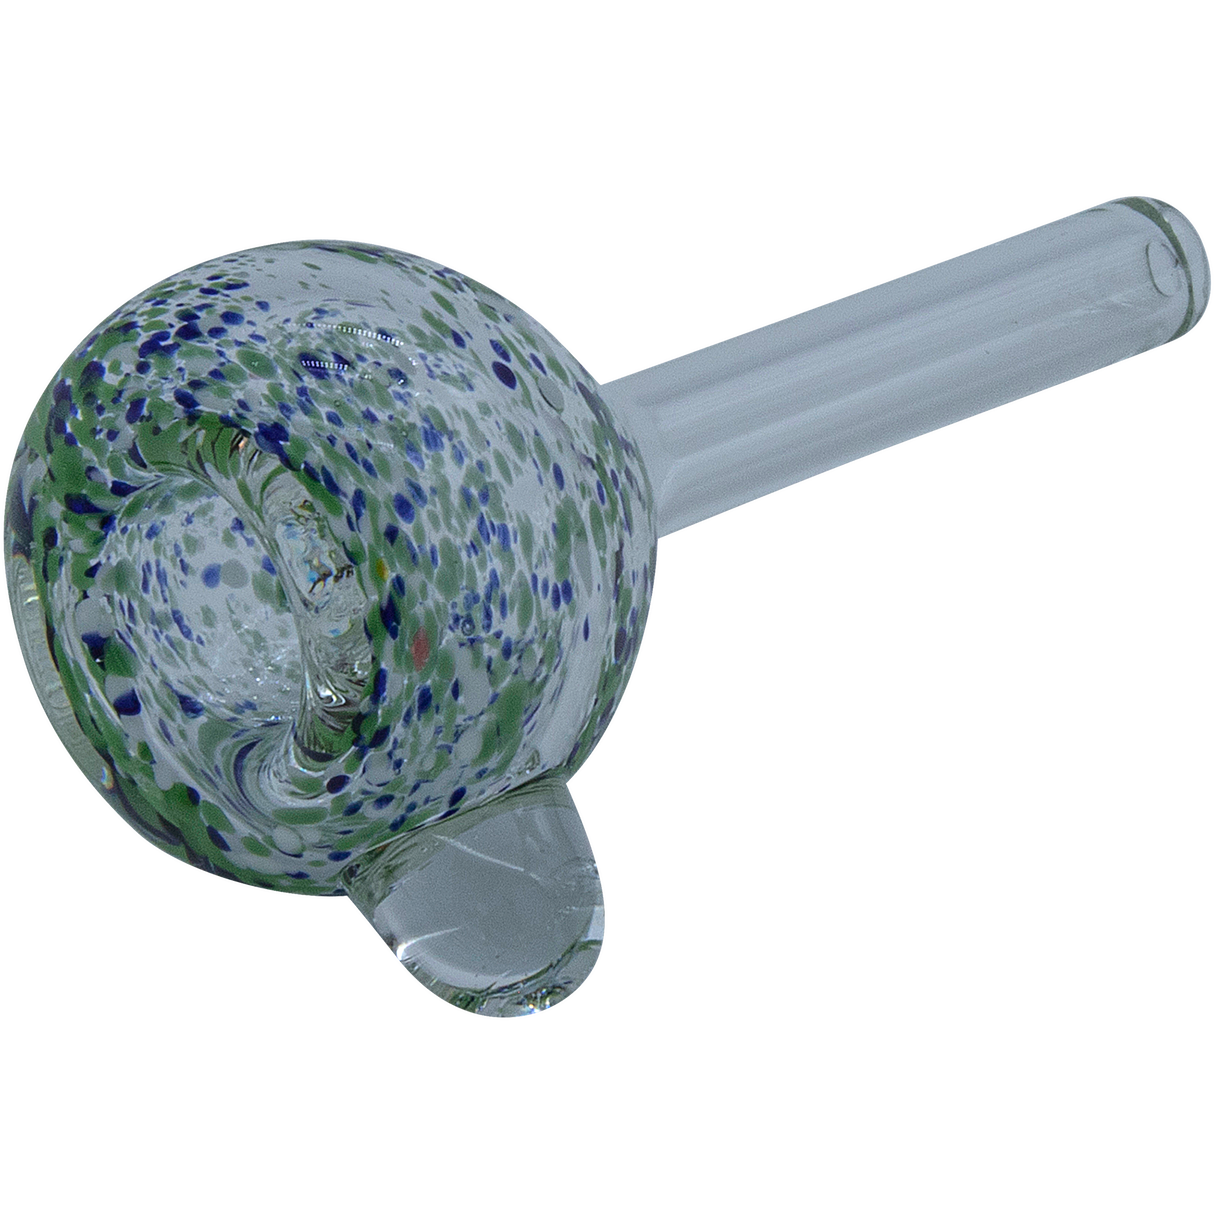 LA Pipes Frit Bubble Bowl Pull-Stem Slide in Mixed Colors for Bongs, 10mm Grommet Joint